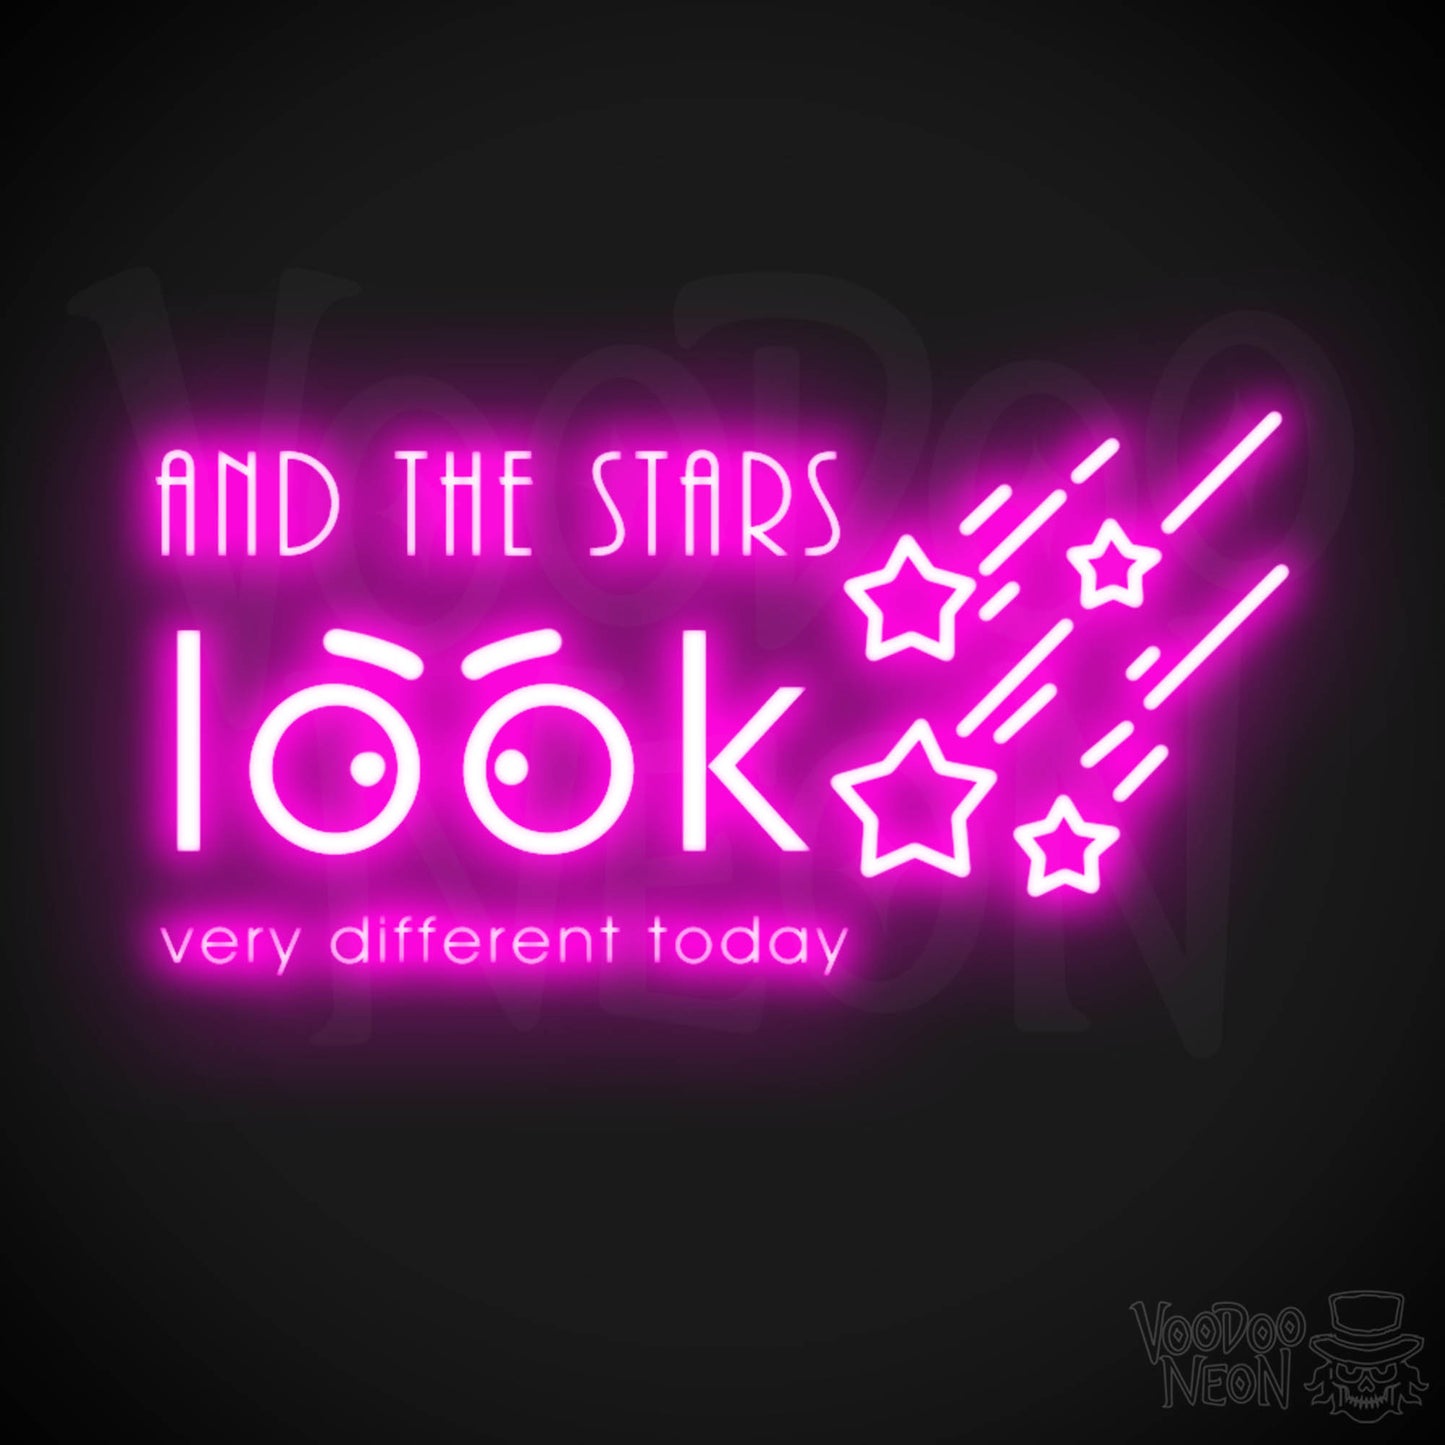 And the Stars Look Very Different Today Neon Sign - LED Wall Art - Color Pink